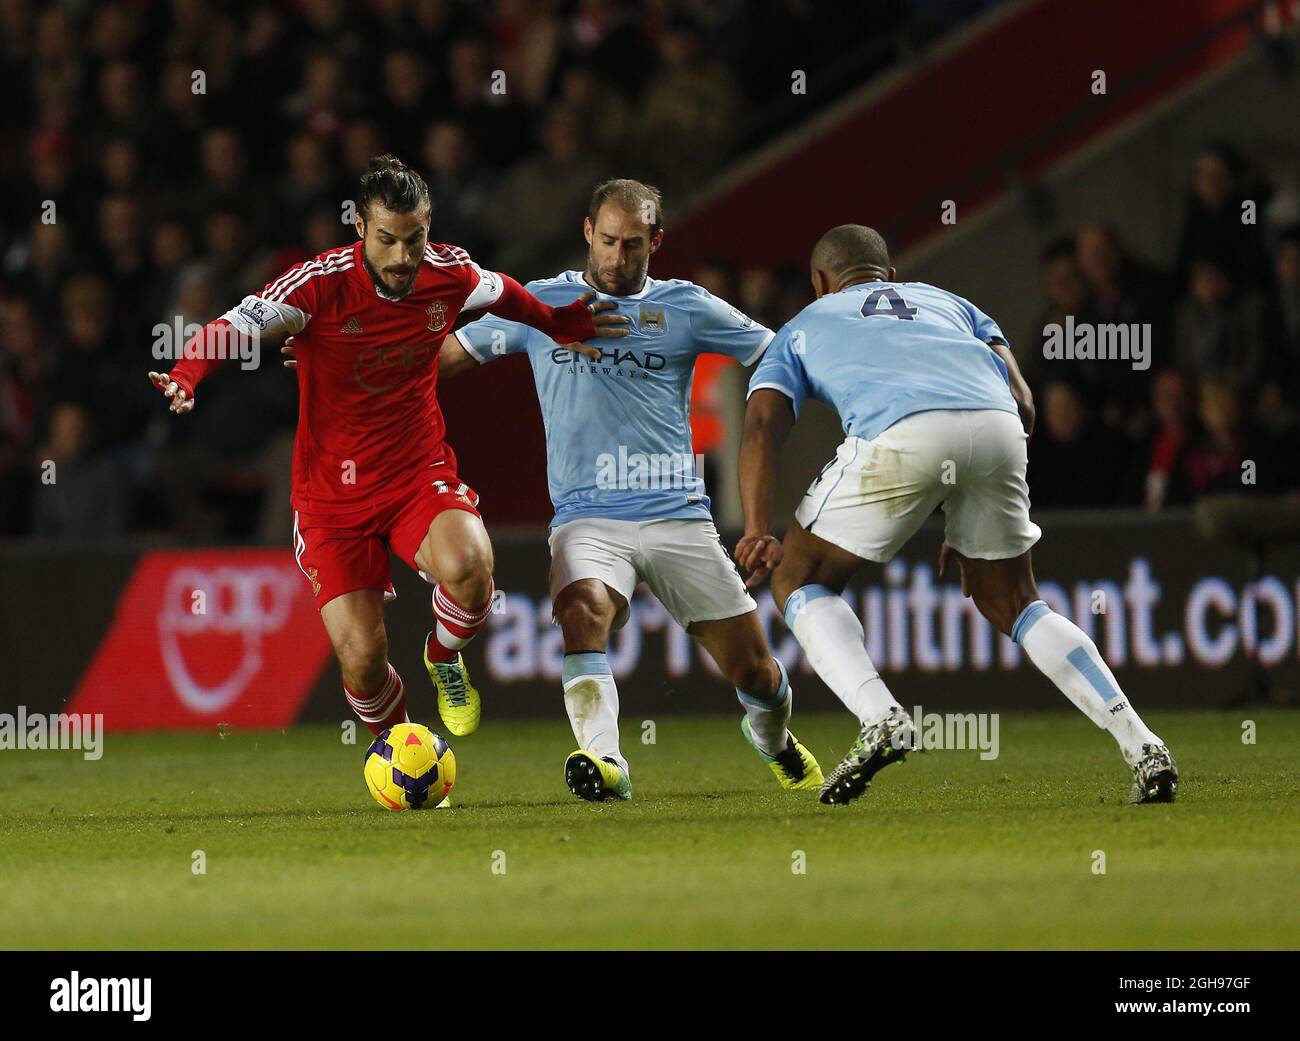 Southampton's Dani Osvaldo tussles with Manchester City's Pablo Zabaleta during the Barclays Premier League match between Southampton and Manchester City at St Mary's Stadium, Southampton on December 7, 2013. Pic: David Klein Stock Photo